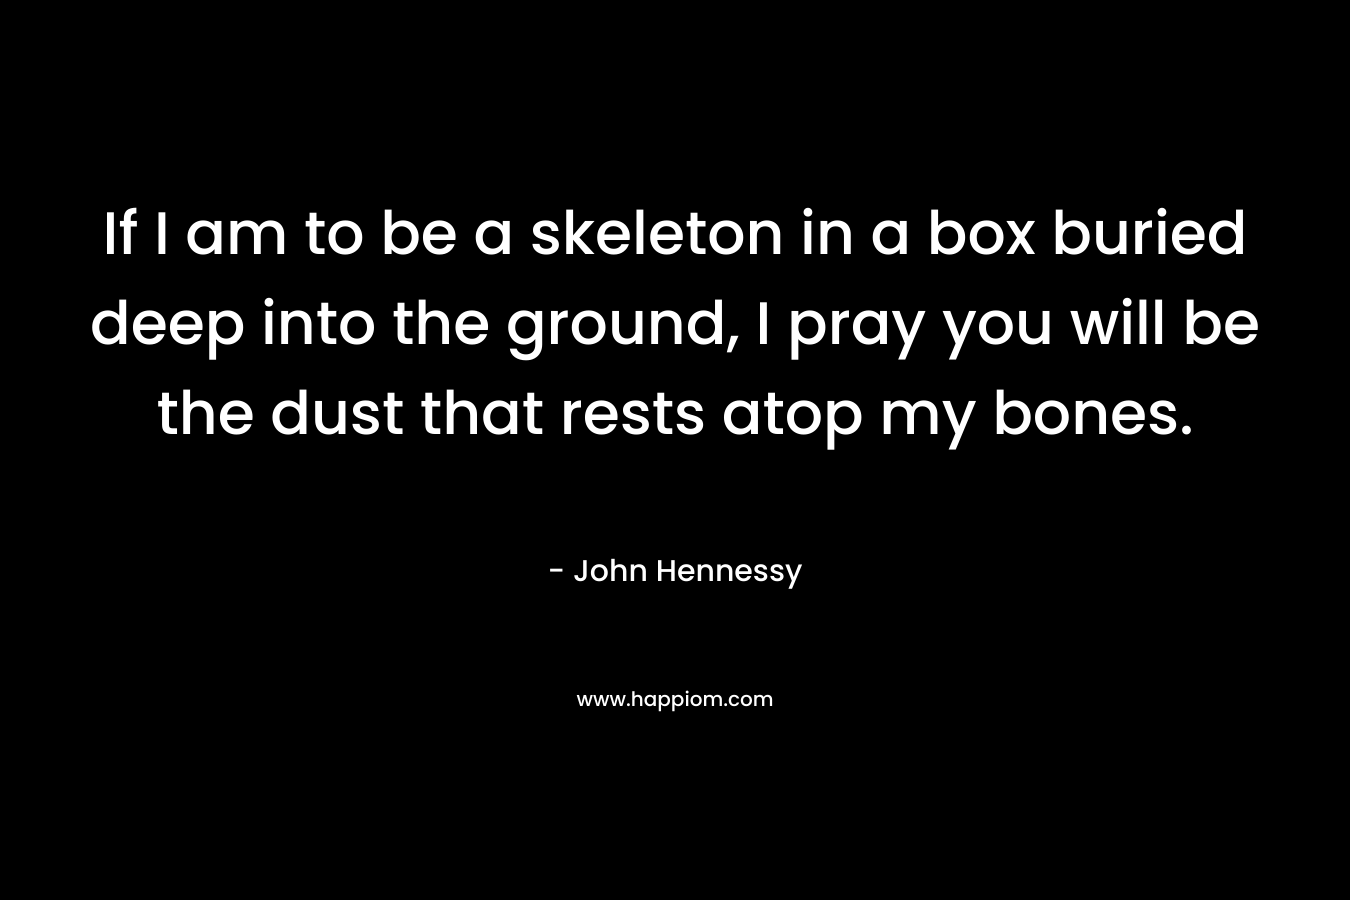 If I am to be a skeleton in a box buried deep into the ground, I pray you will be the dust that rests atop my bones.